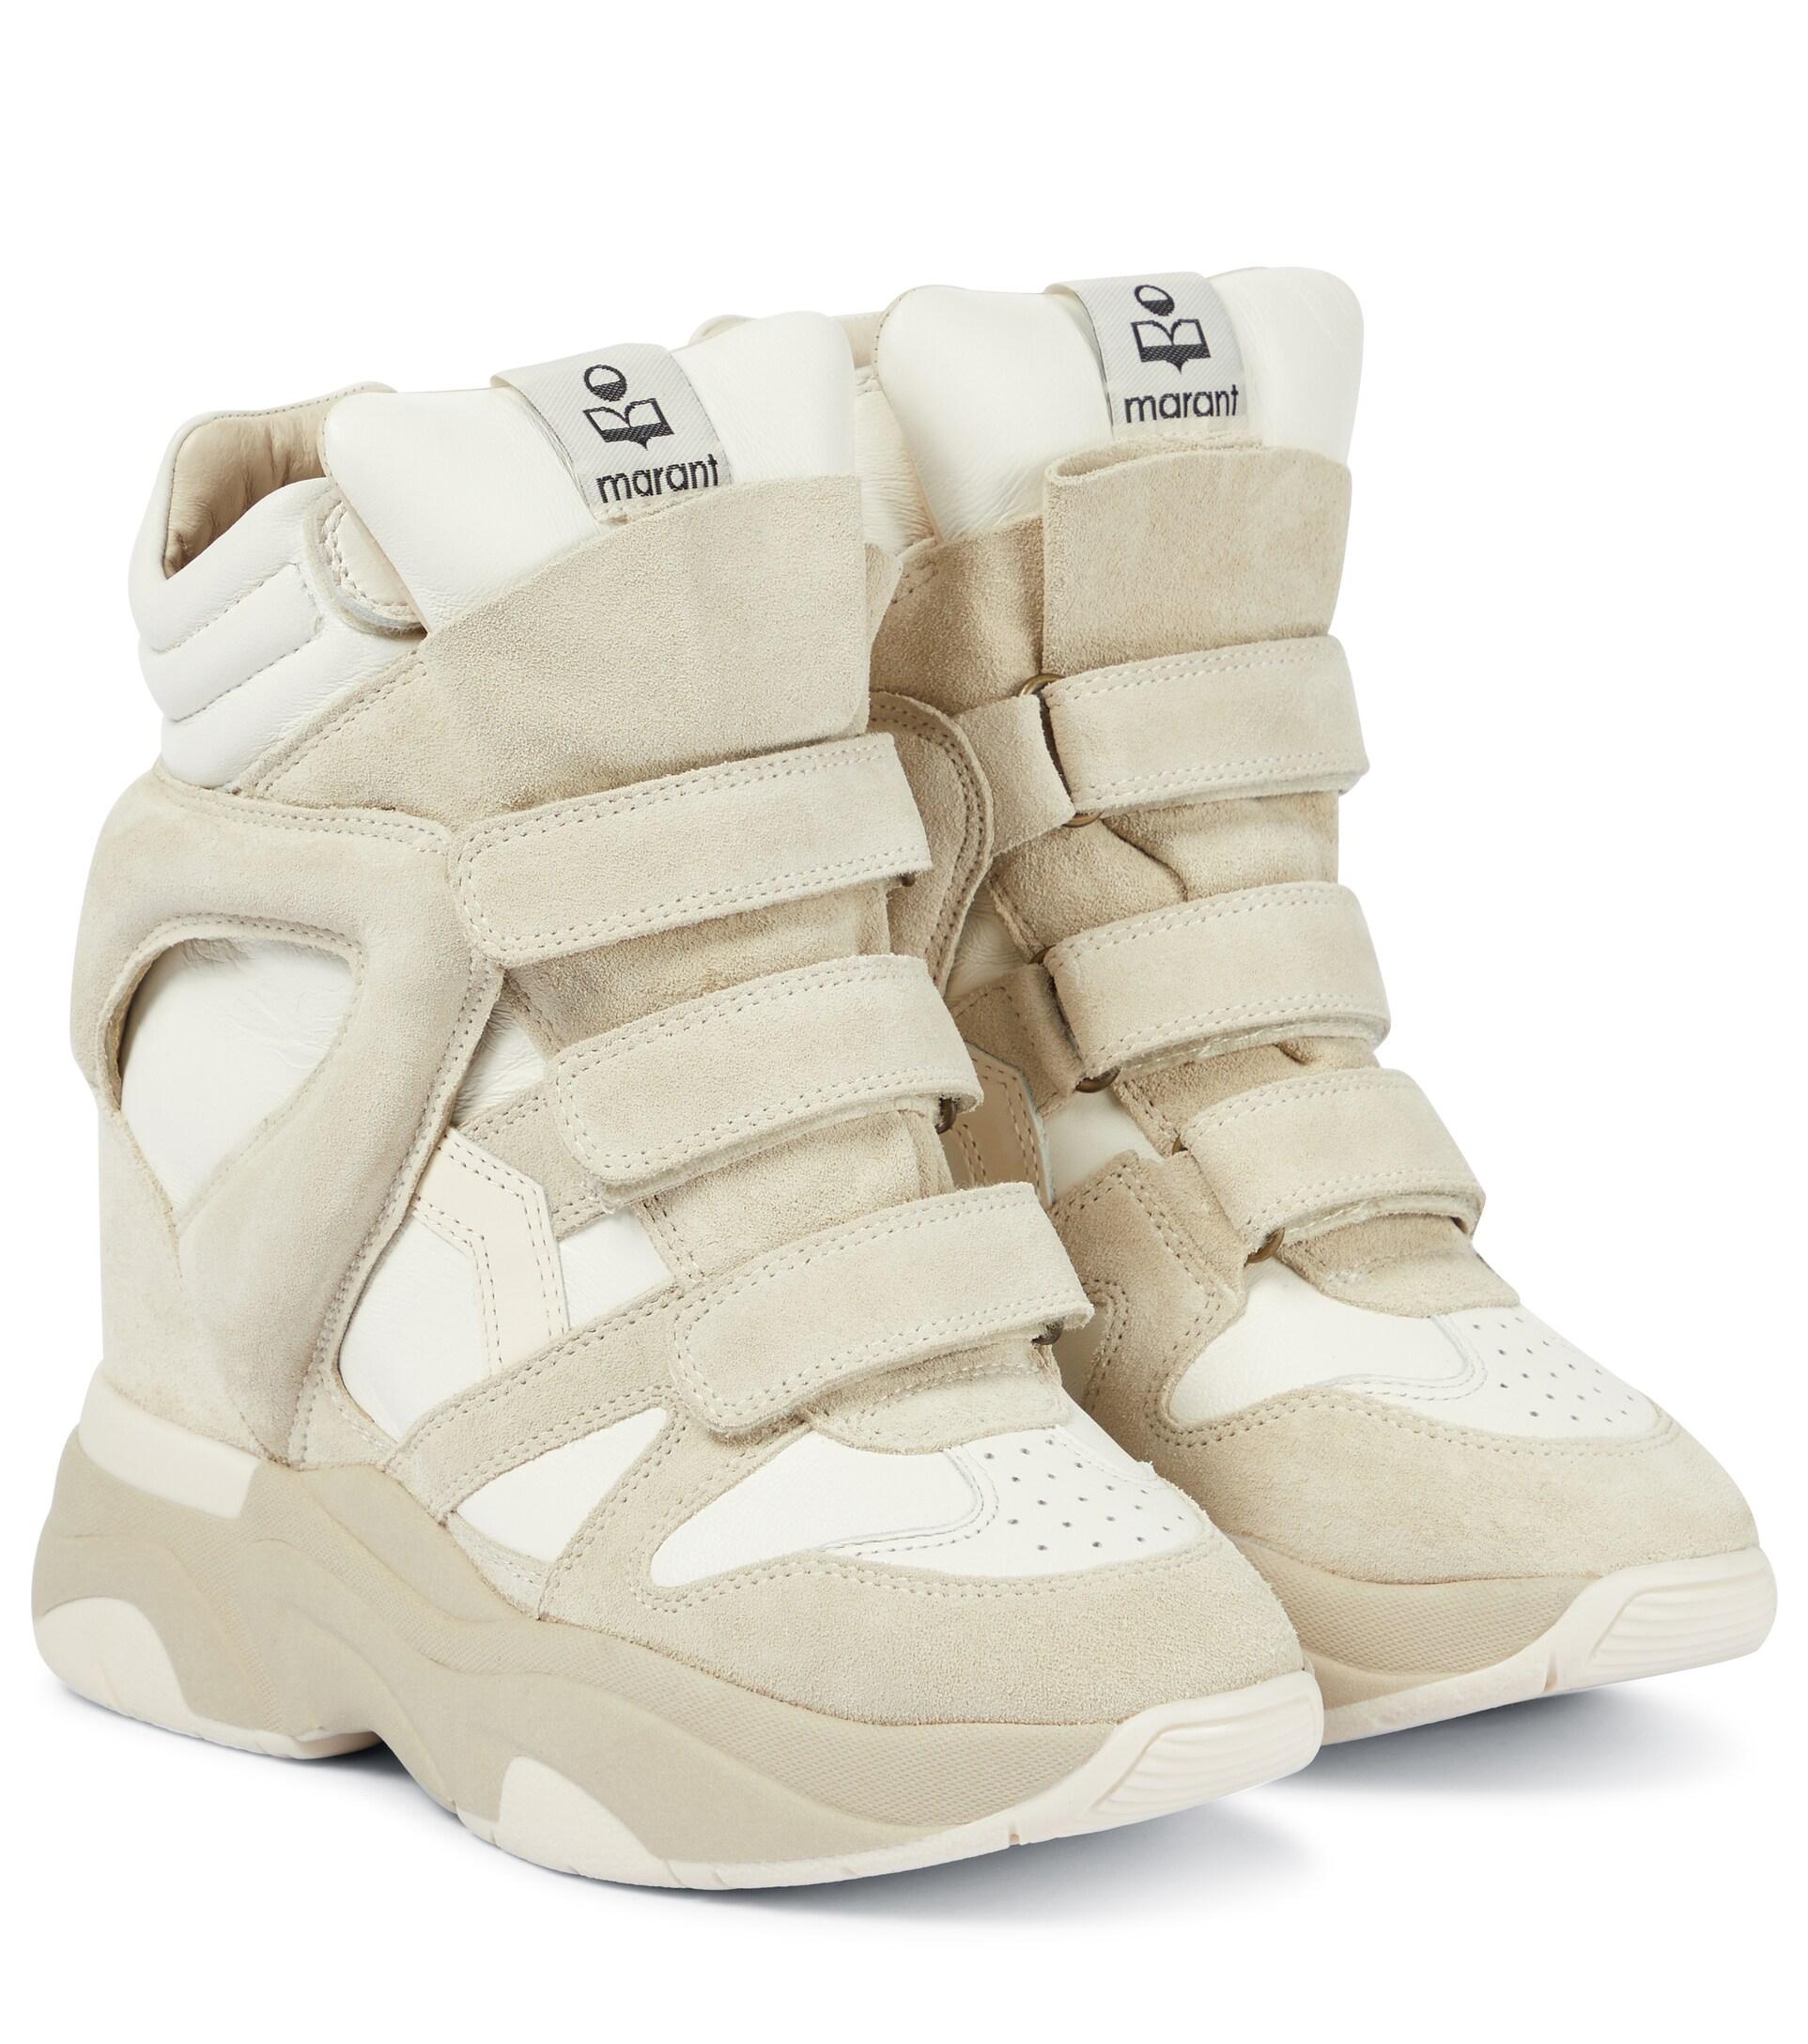 Isabel Marant Leather Wedge Sneakers in White Lyst